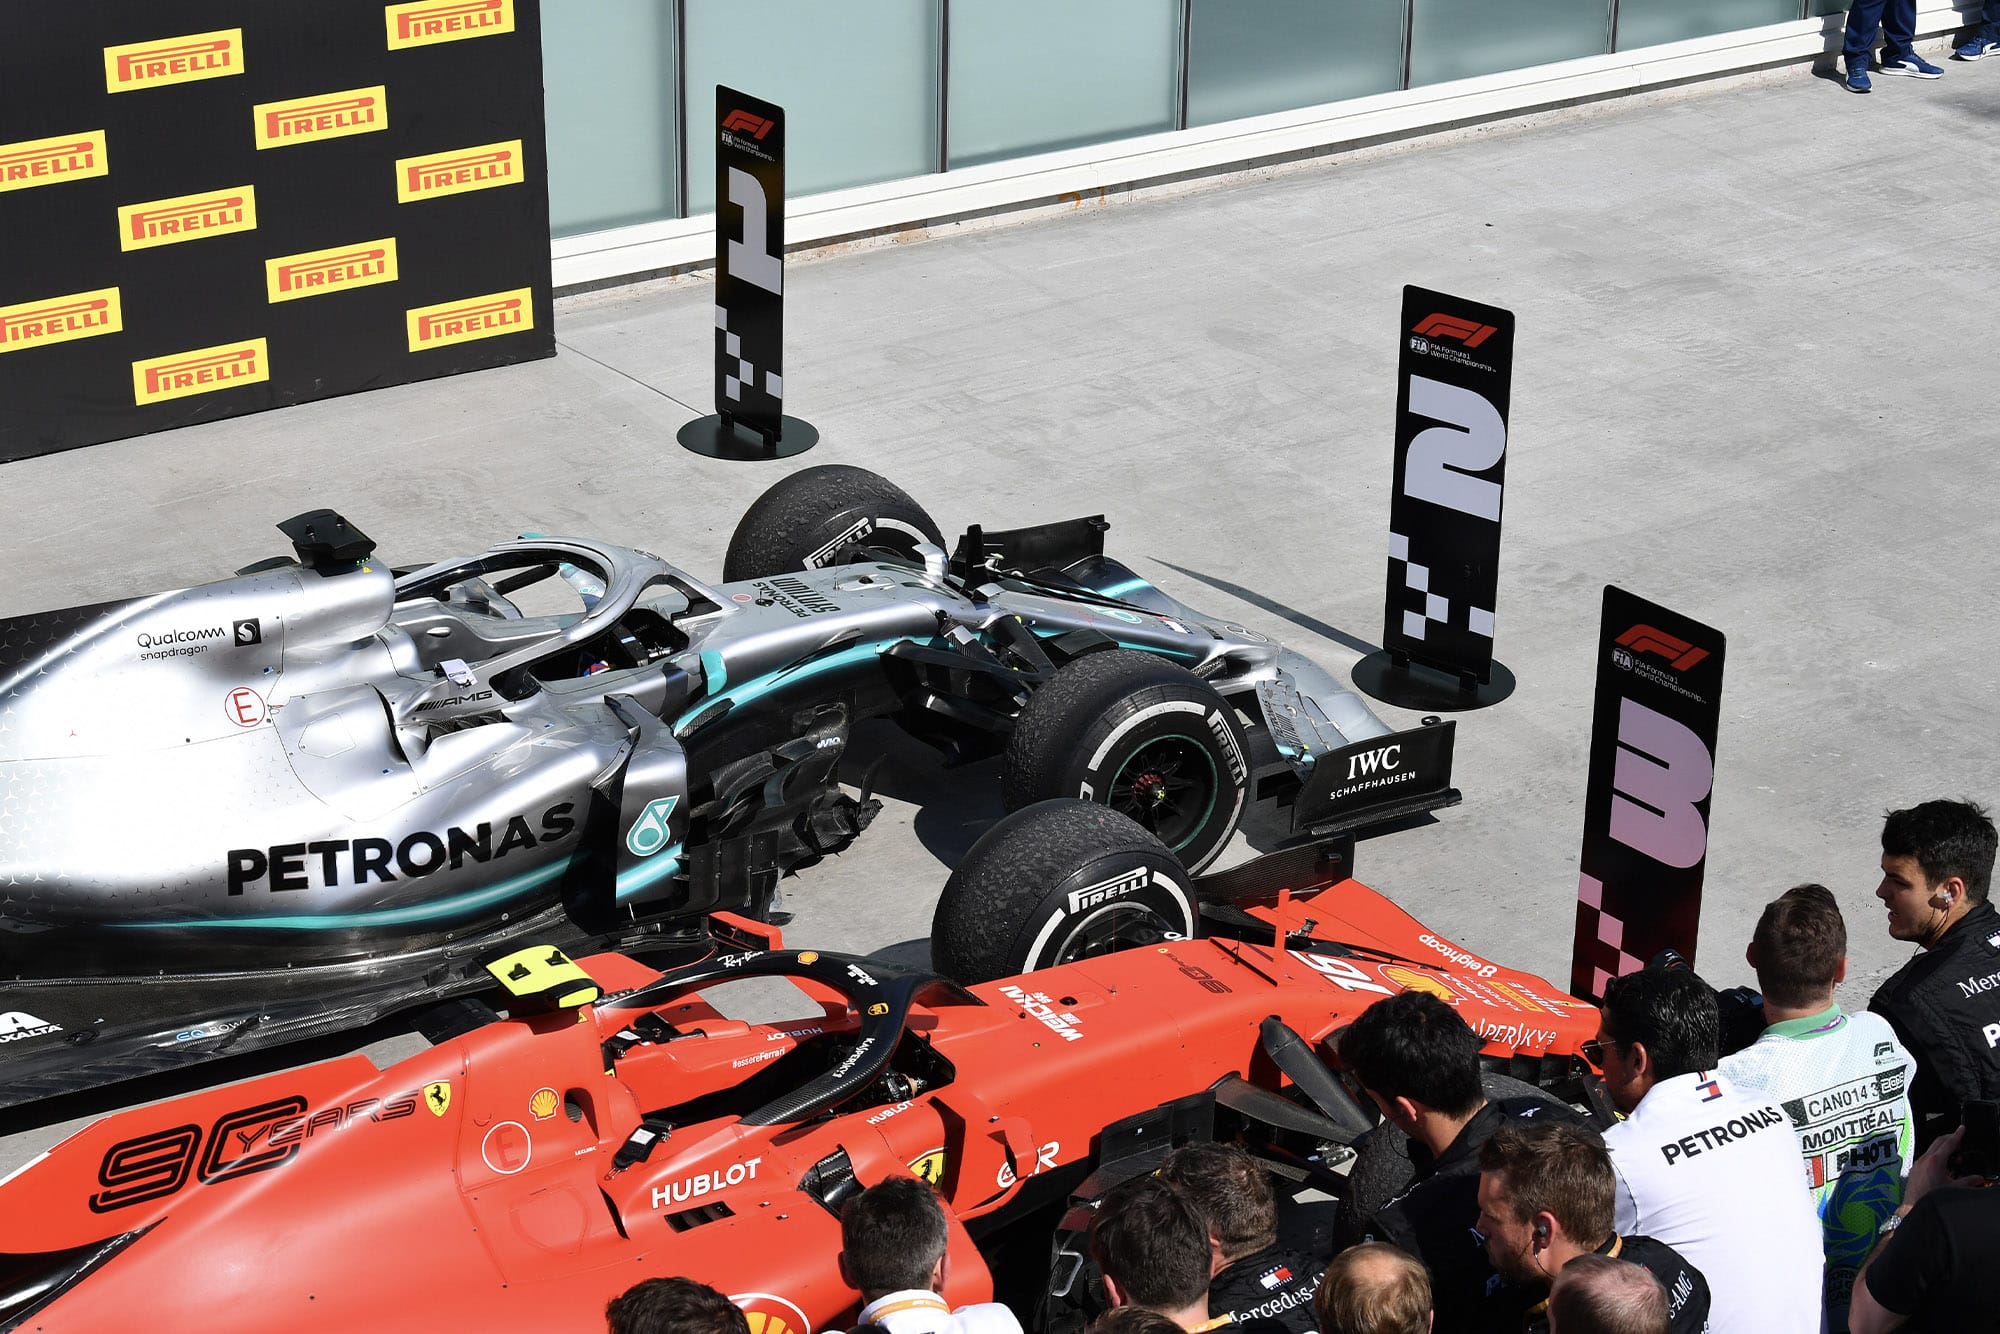 The scene in parc ferme after the 2019 Canadian Grand Prix